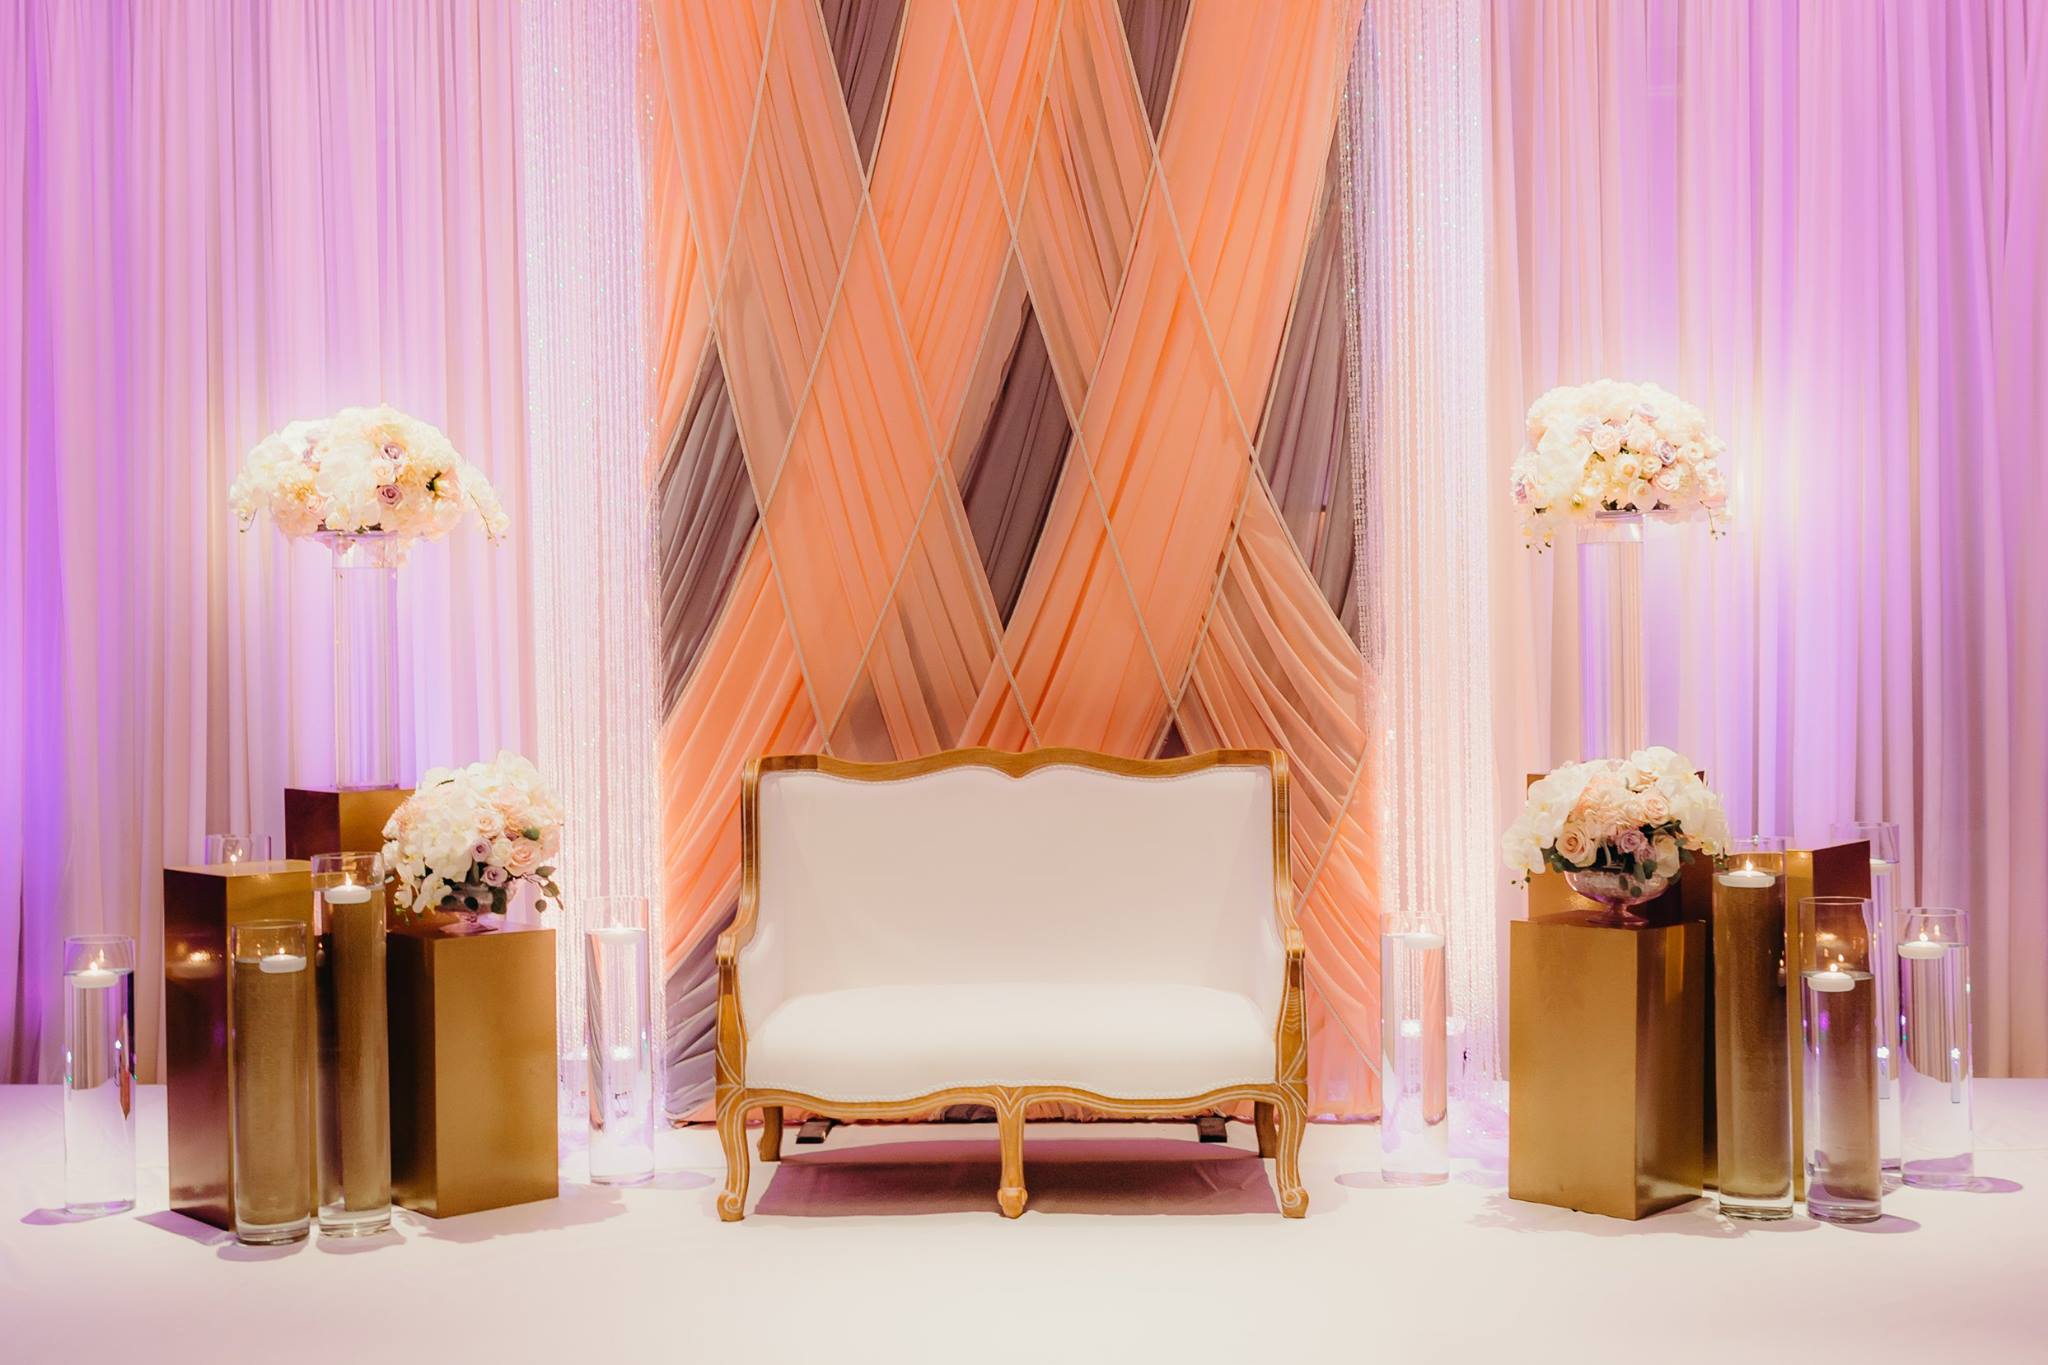 Gold wedding furniture and loveseat in front of rose, purple, and white pipe and drape setups